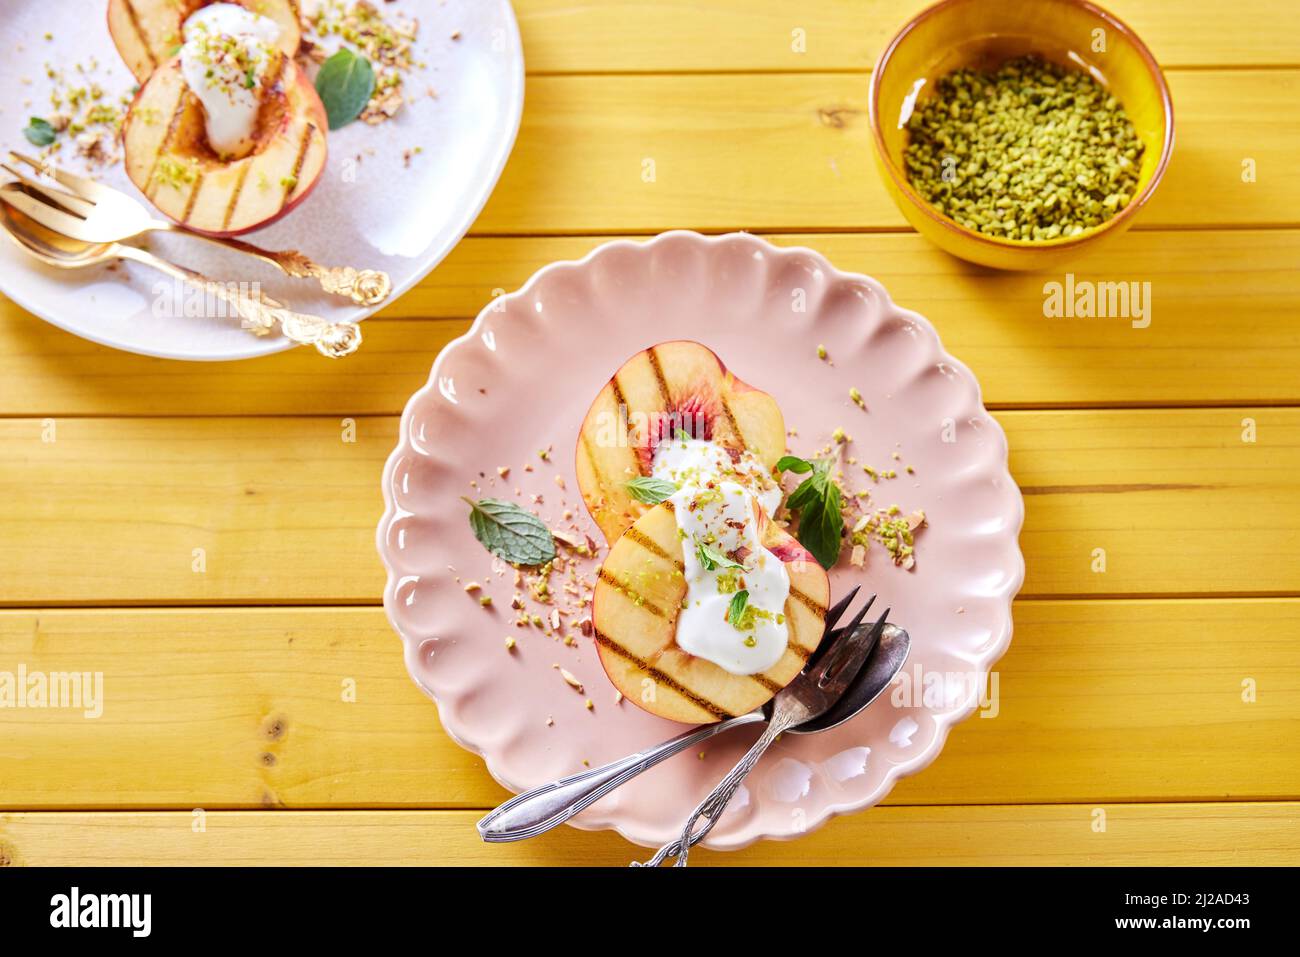 Overhead view of plate with delicious sweet nectarines with yogurt and mint leaves served on wooden table with bowl of pistachios Stock Photo